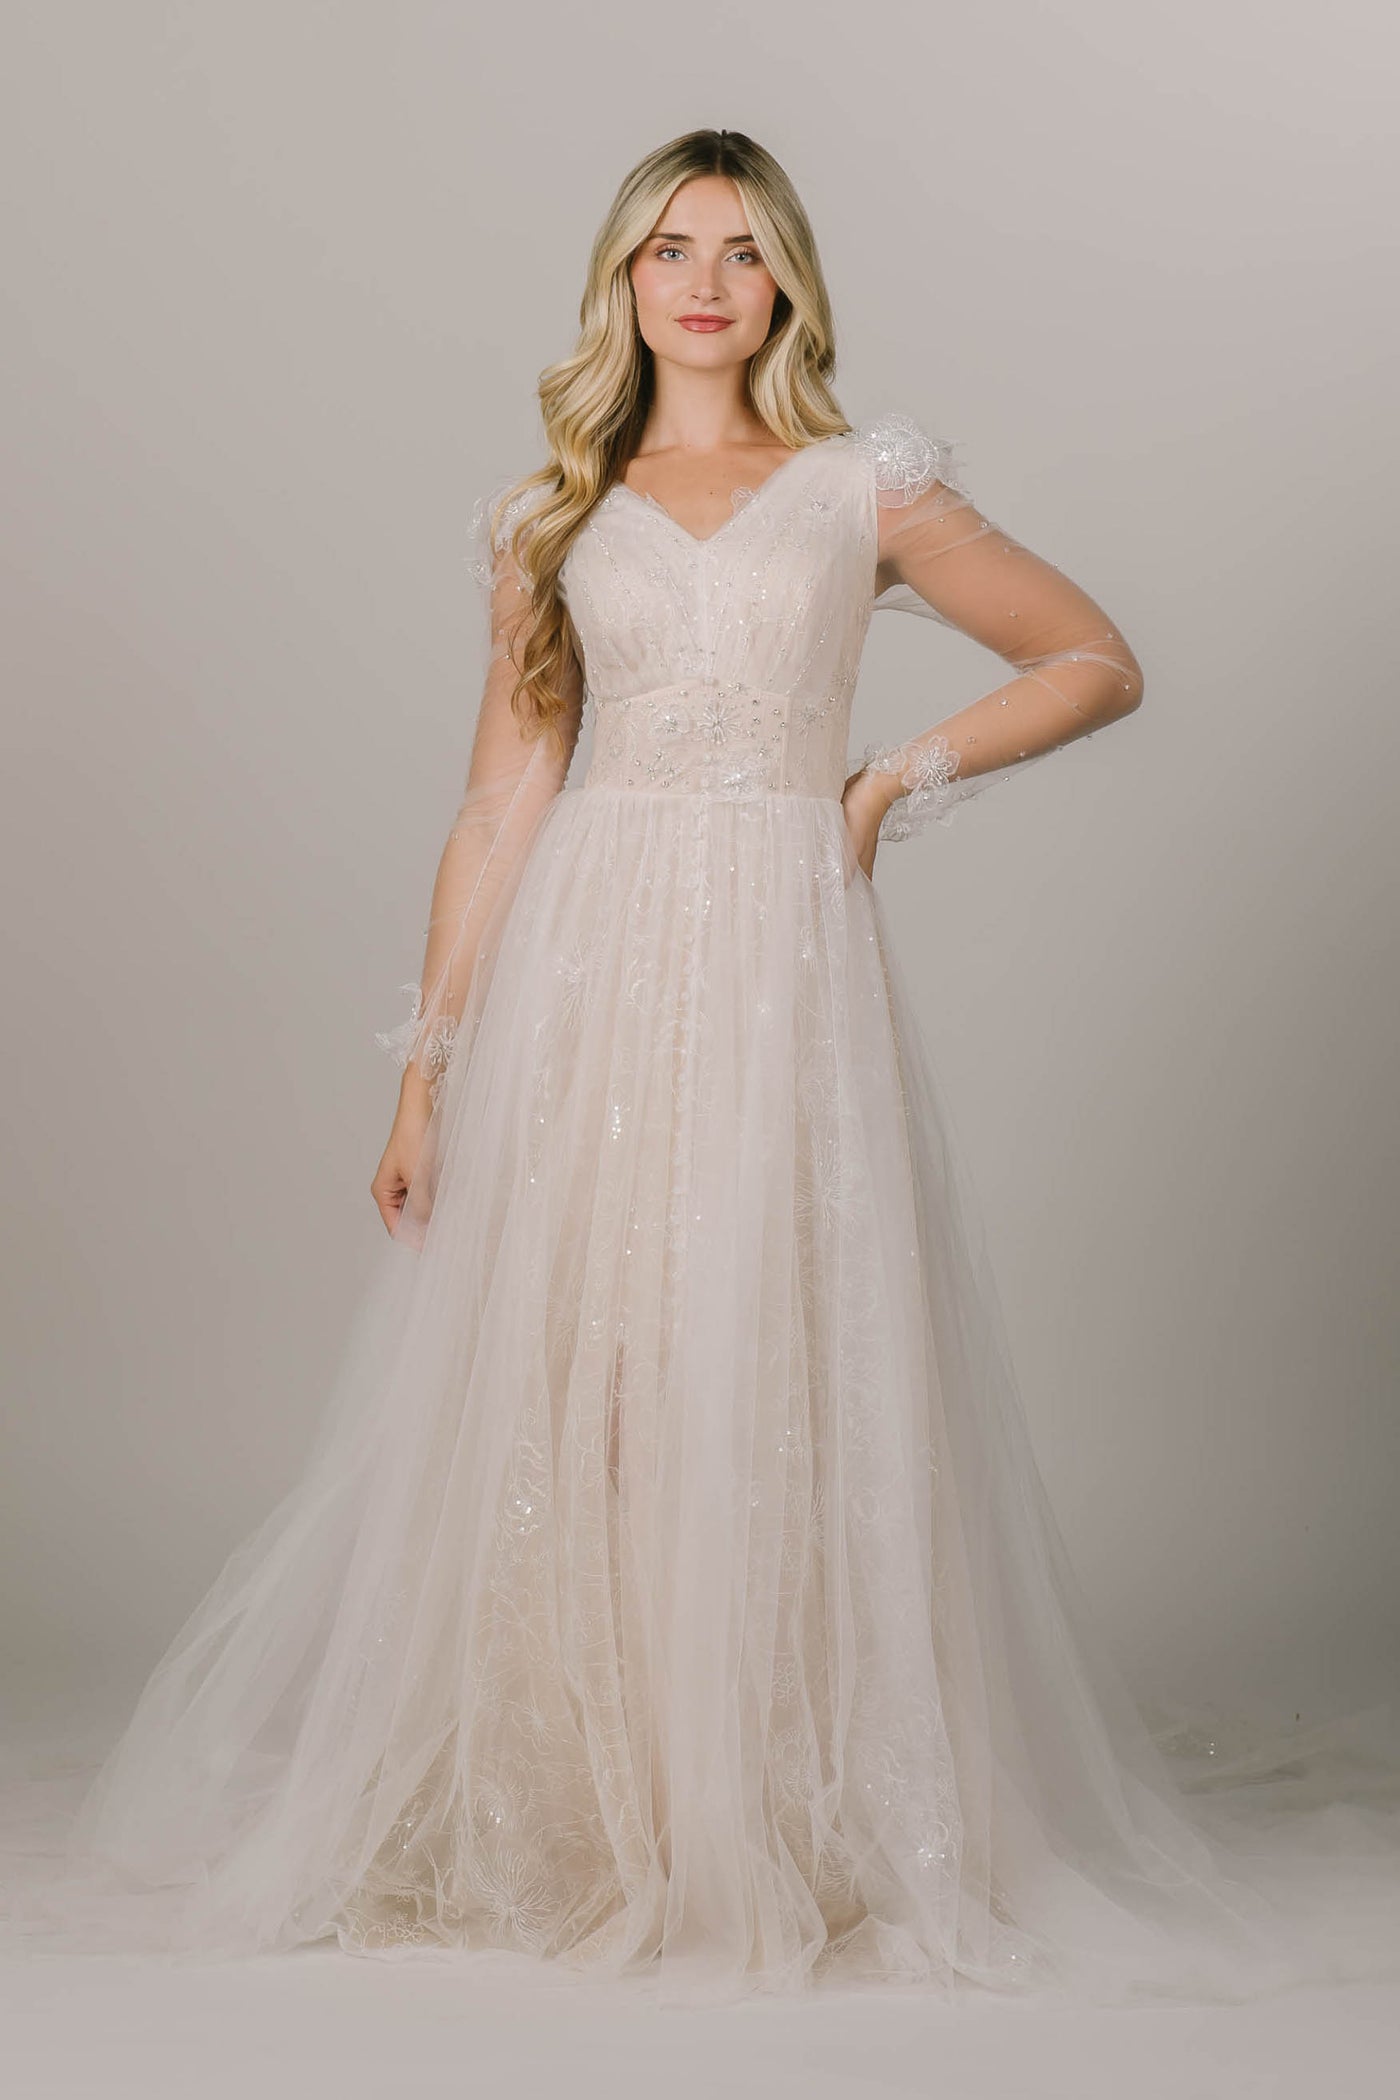 This is a princess modest wedding dress with sheer sleeves and a sparkly  layer on the skir.